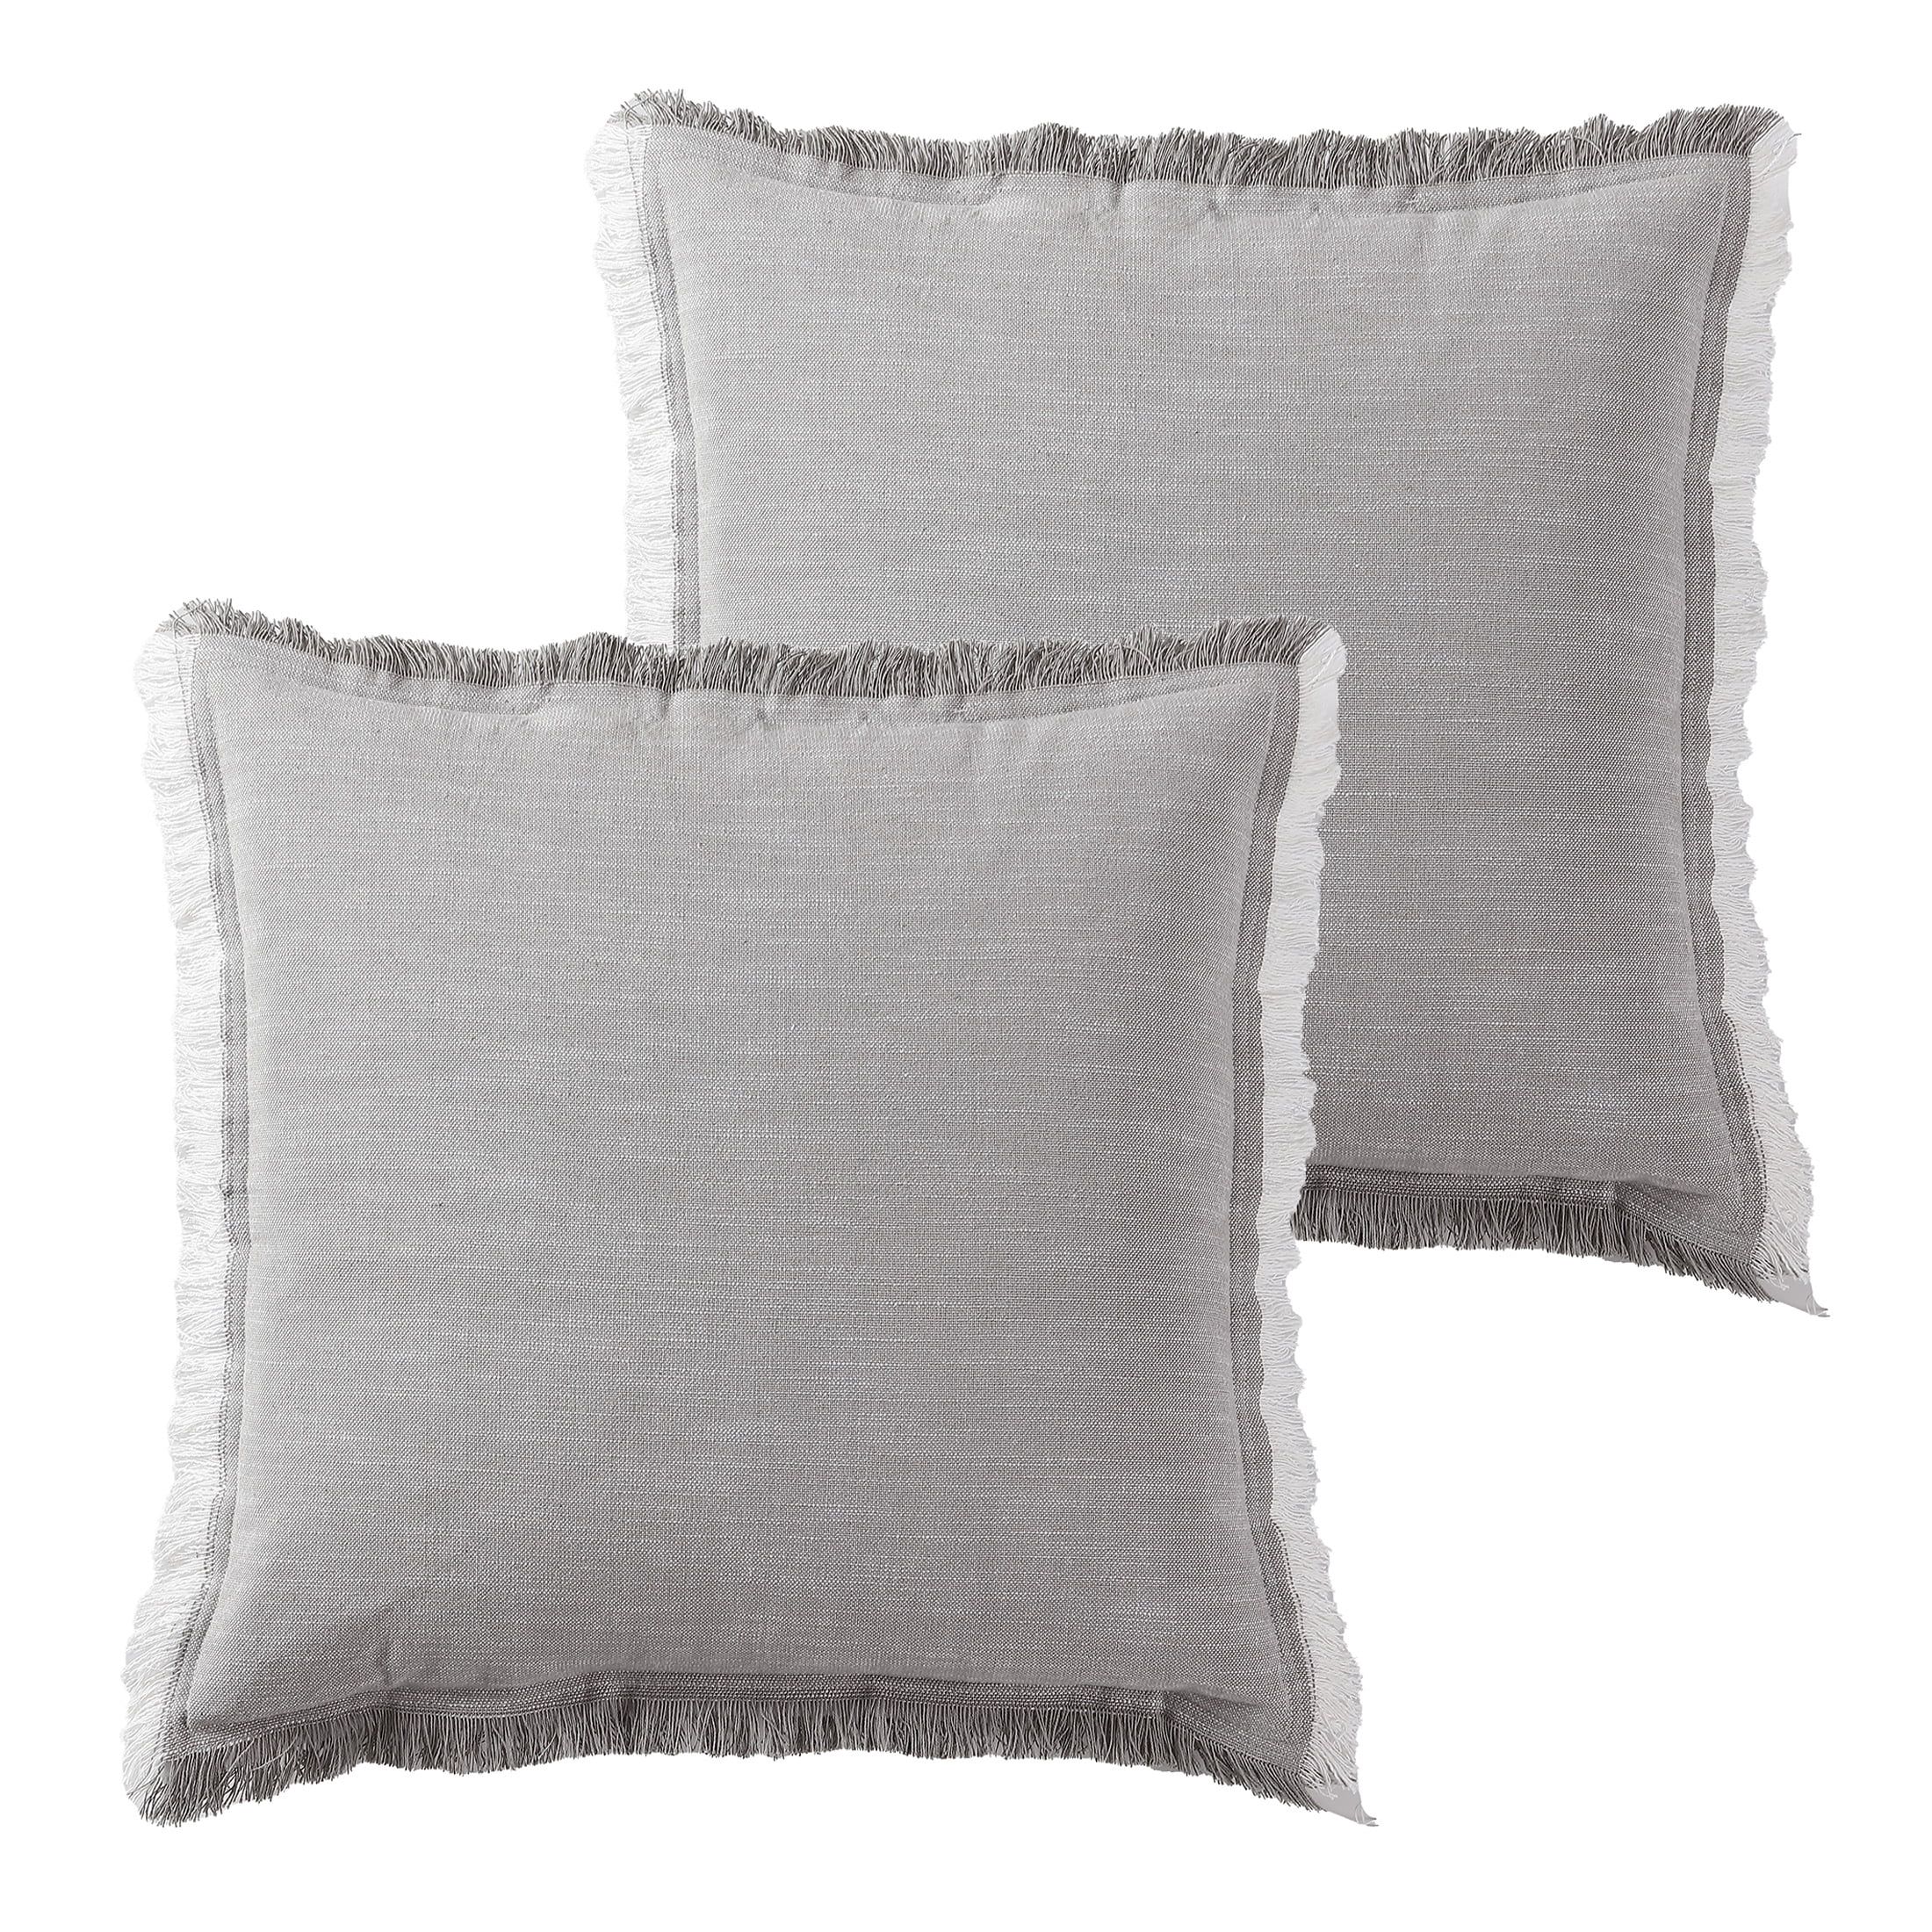 Better Homes & Gardens Decorative Throw Pillow, Cotton Fringe, Square, Grey, 20''x20'', 2 Pack - ... | Walmart (US)